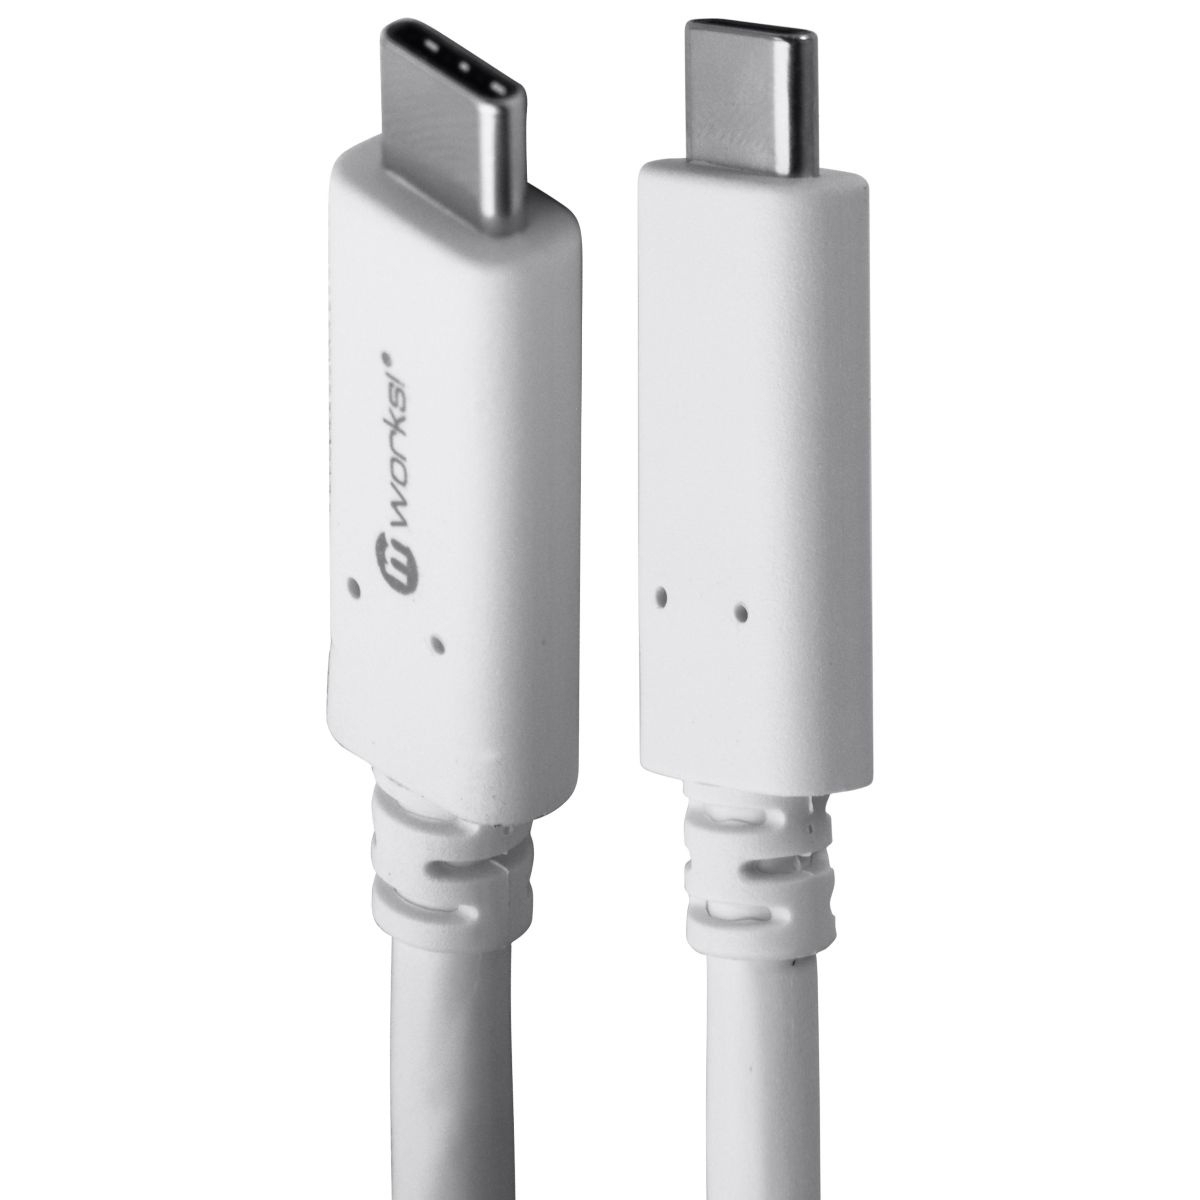 MWorks! MPower! (6-Foot) Round USB-C To USB-C Charging Cable - White